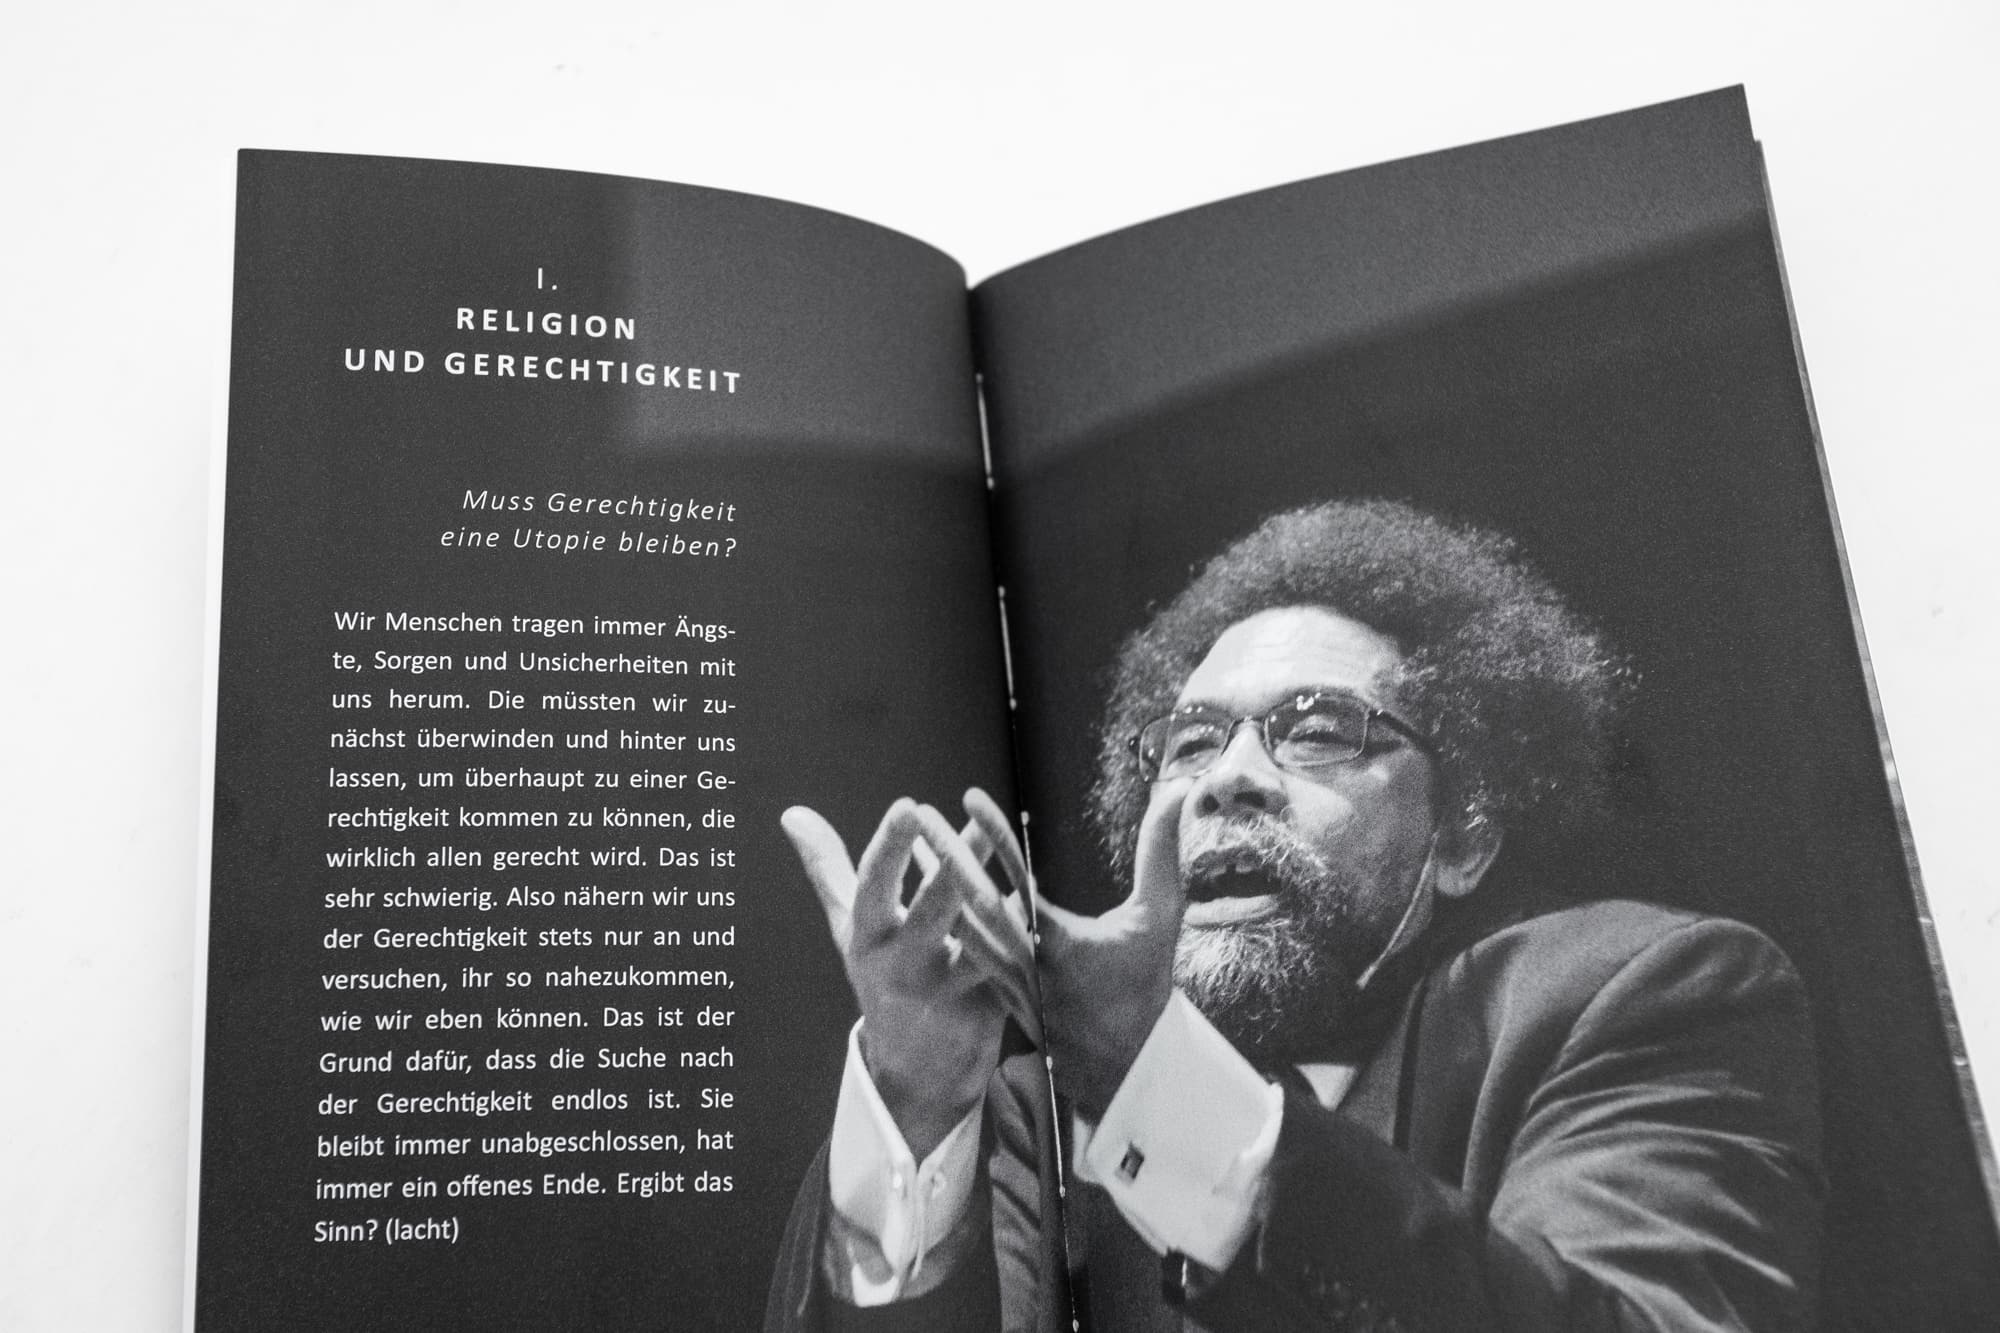 Publication by the philosophical research institute Hannover on the discussion with Cornel West in 2014.